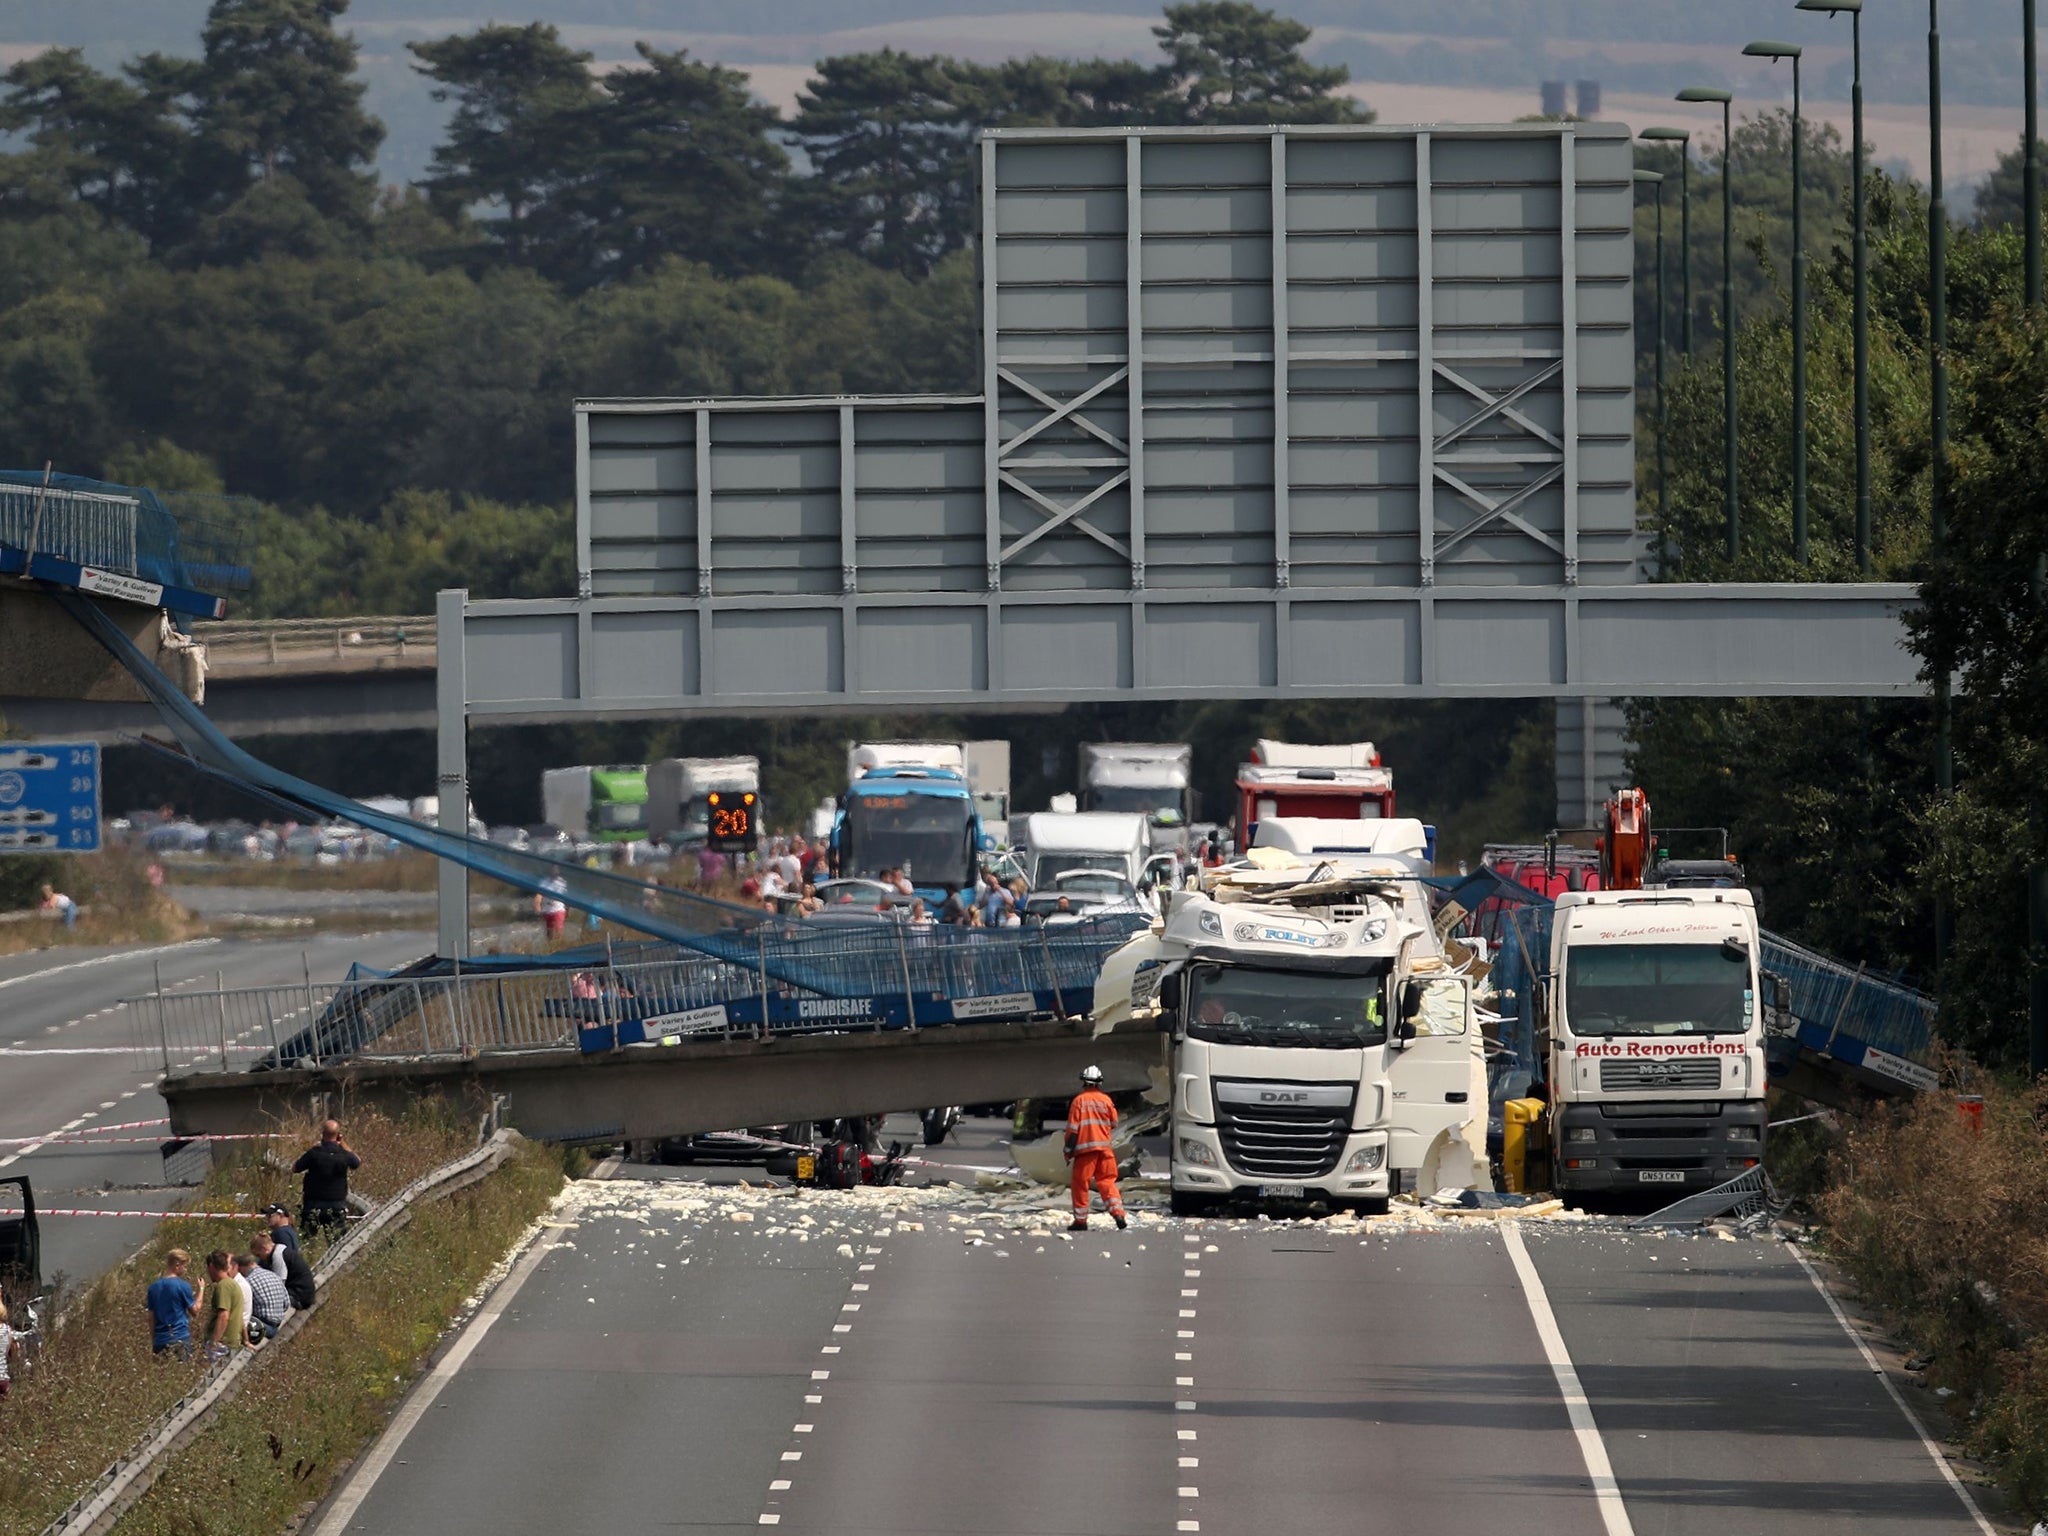 The bridge came down between junctions three and four shortly after noon on Saturday